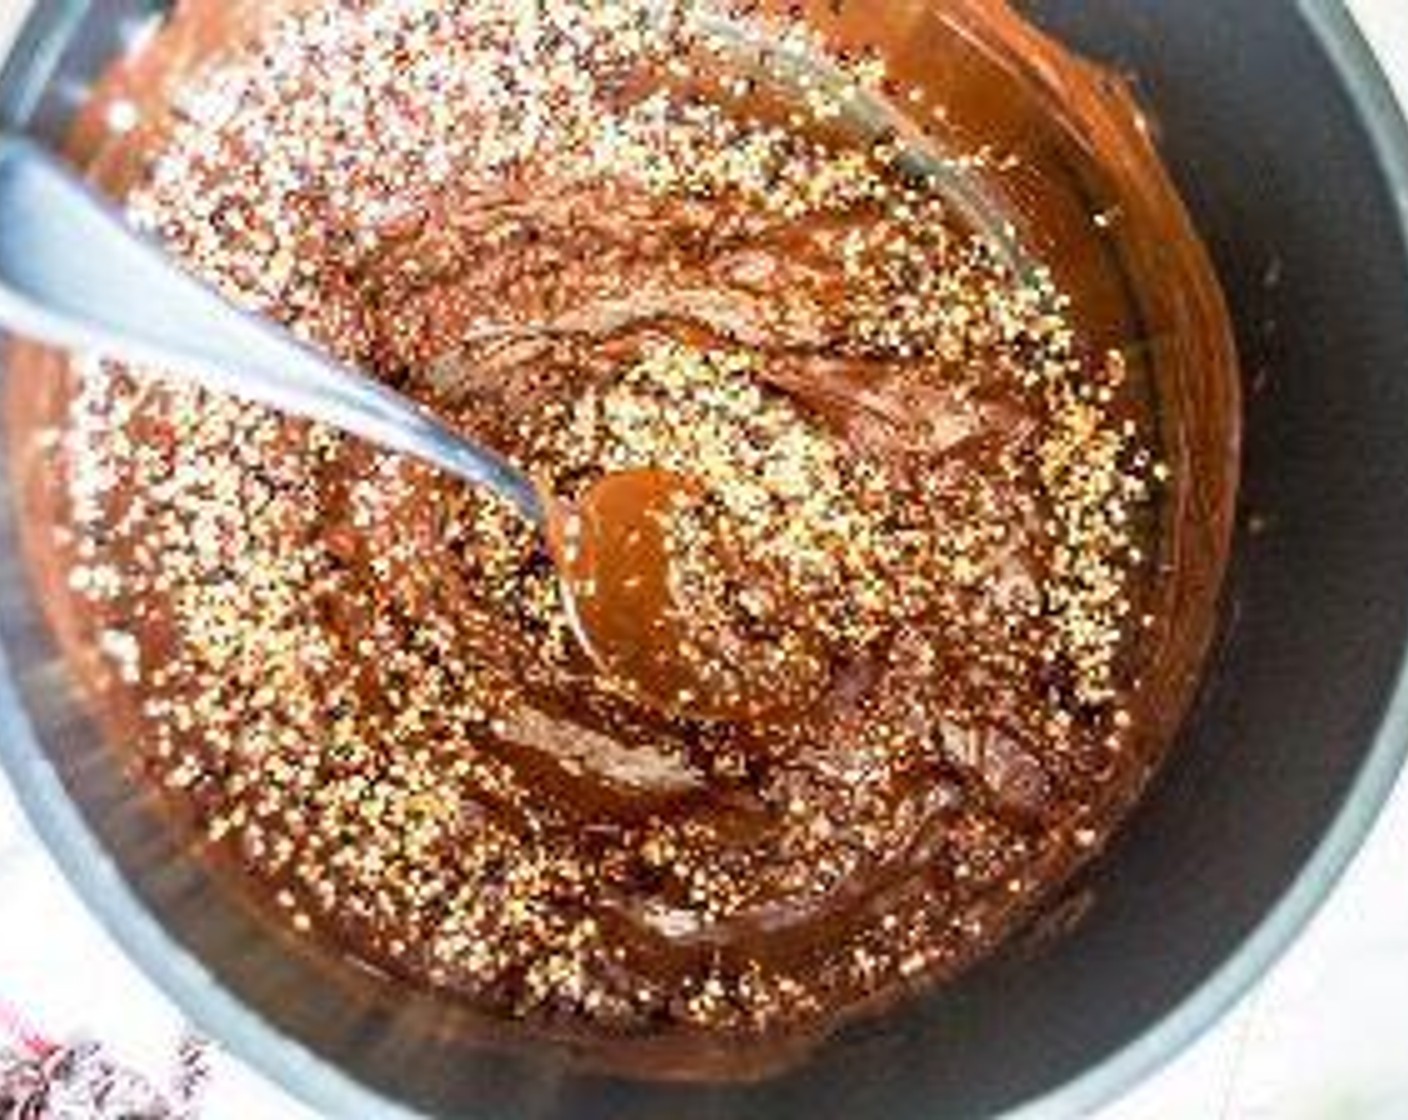 step 6 Once chocolate has fully melted, remove from heat and stir in toasted quinoa until well mixed.